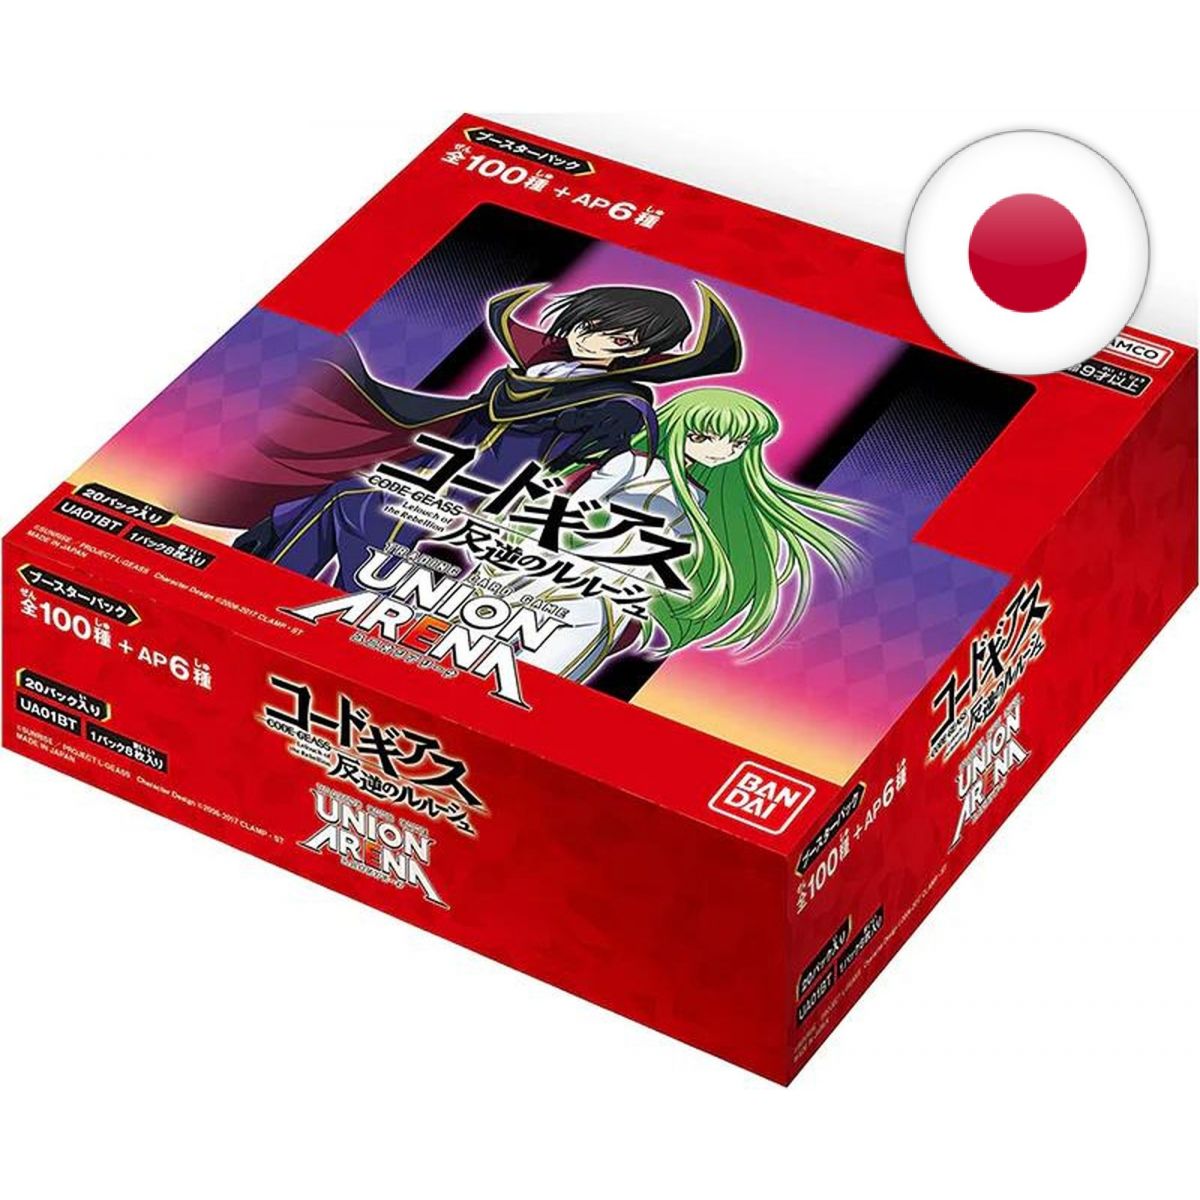 Item Union Arena - Display - Boite de 20 Boosters - Code Geass Lelouch of the Rebellion - JP